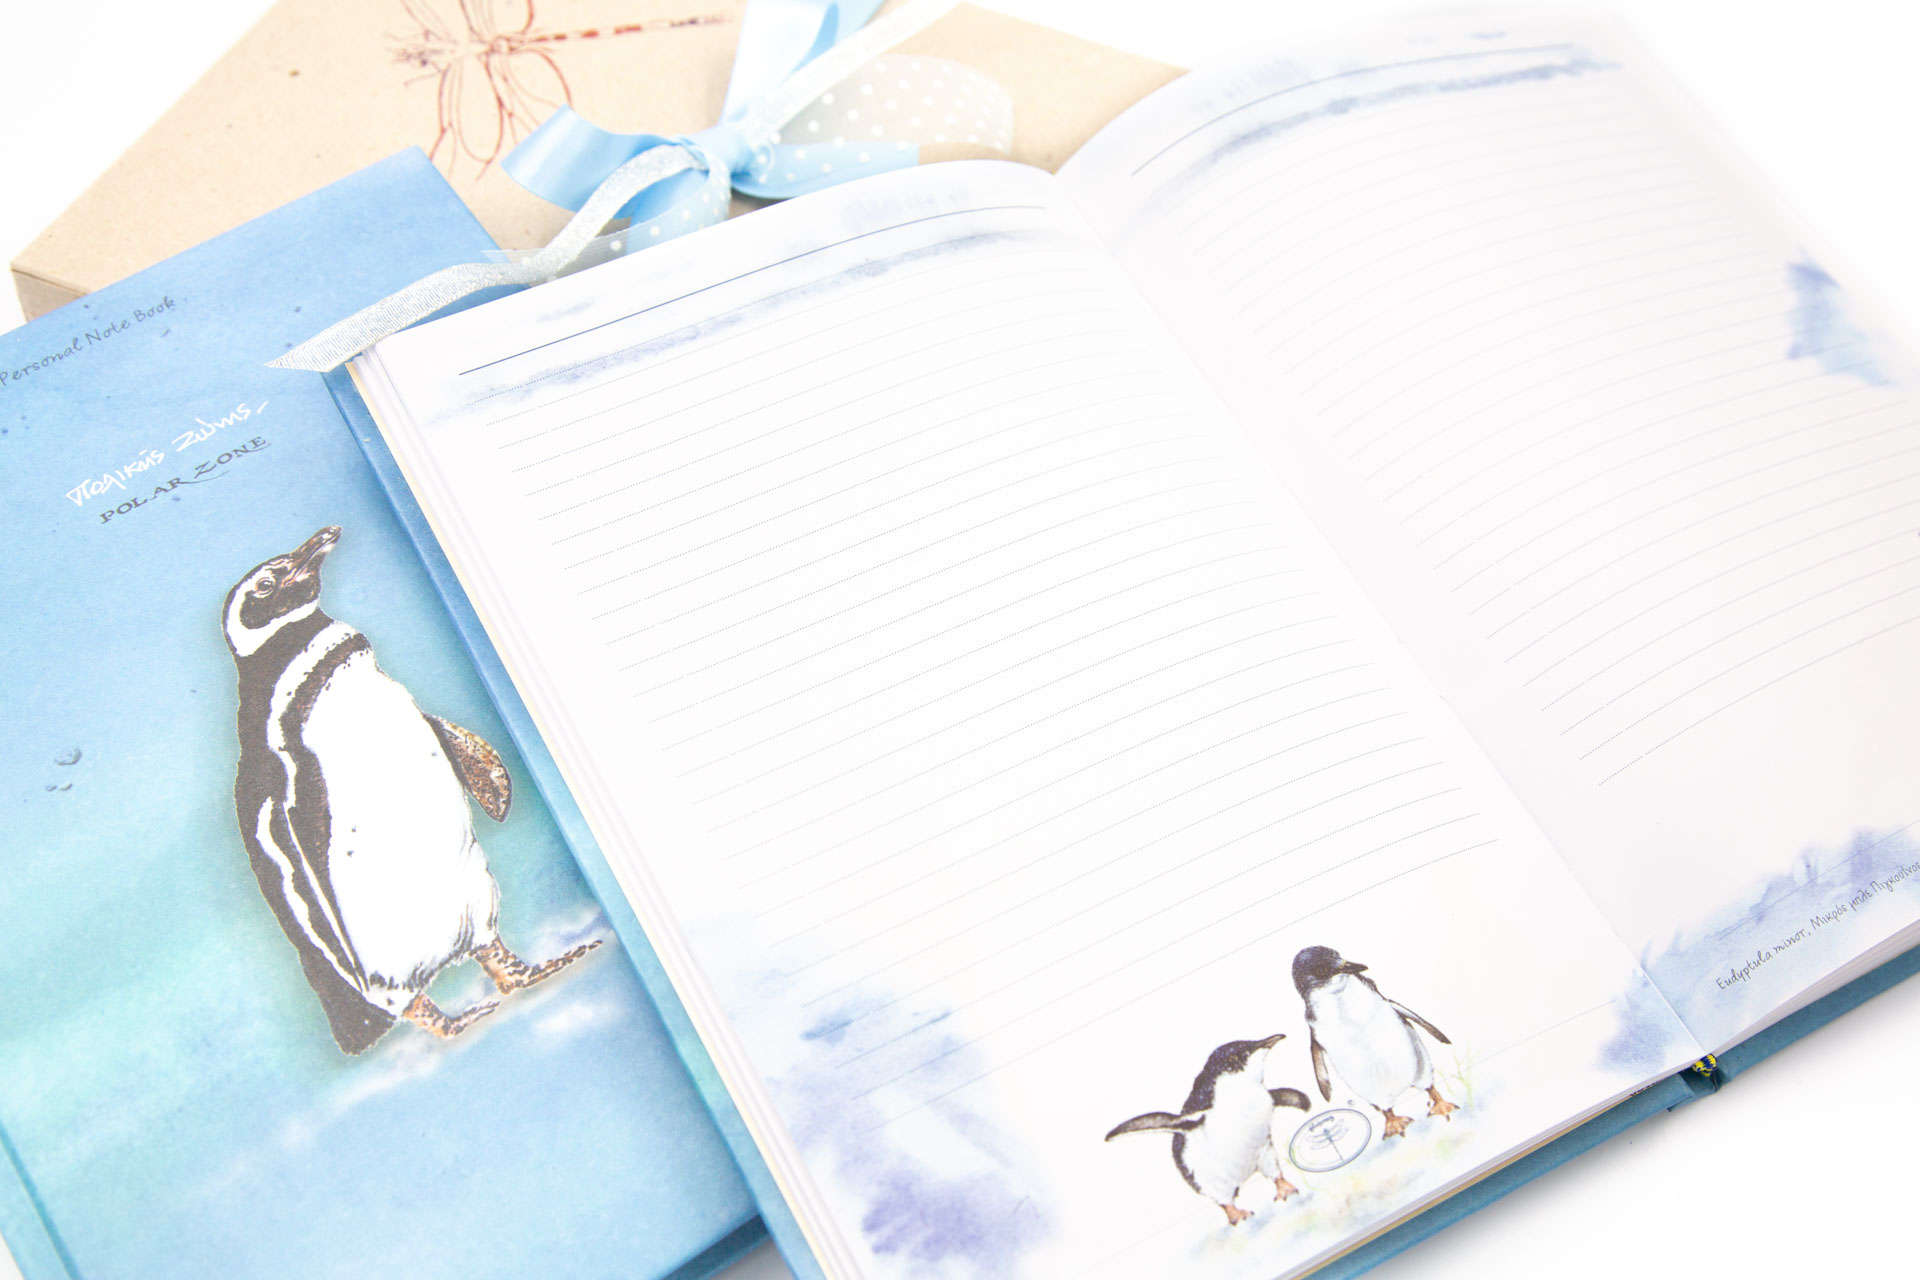 Personal notebook "Polar Zone" - Details